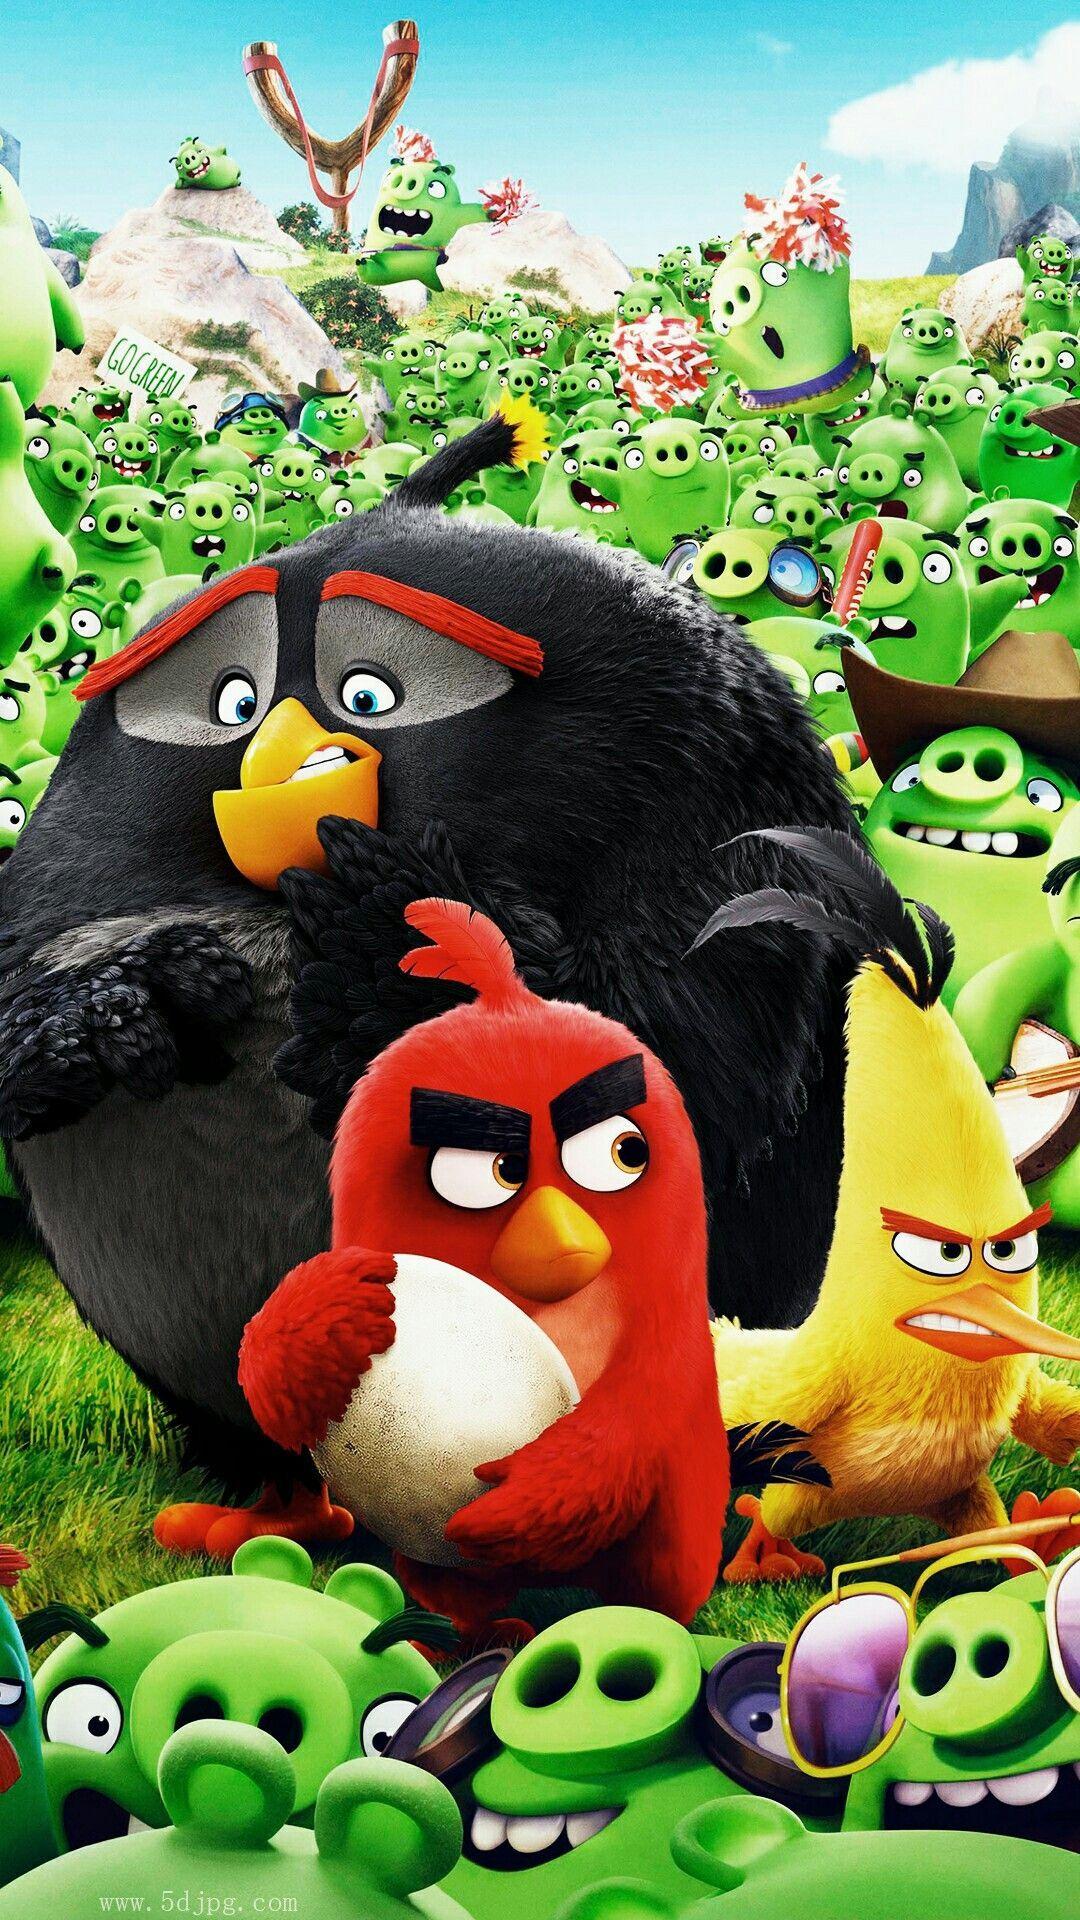 Angry Bird Film. Angry bird picture, Angry birds